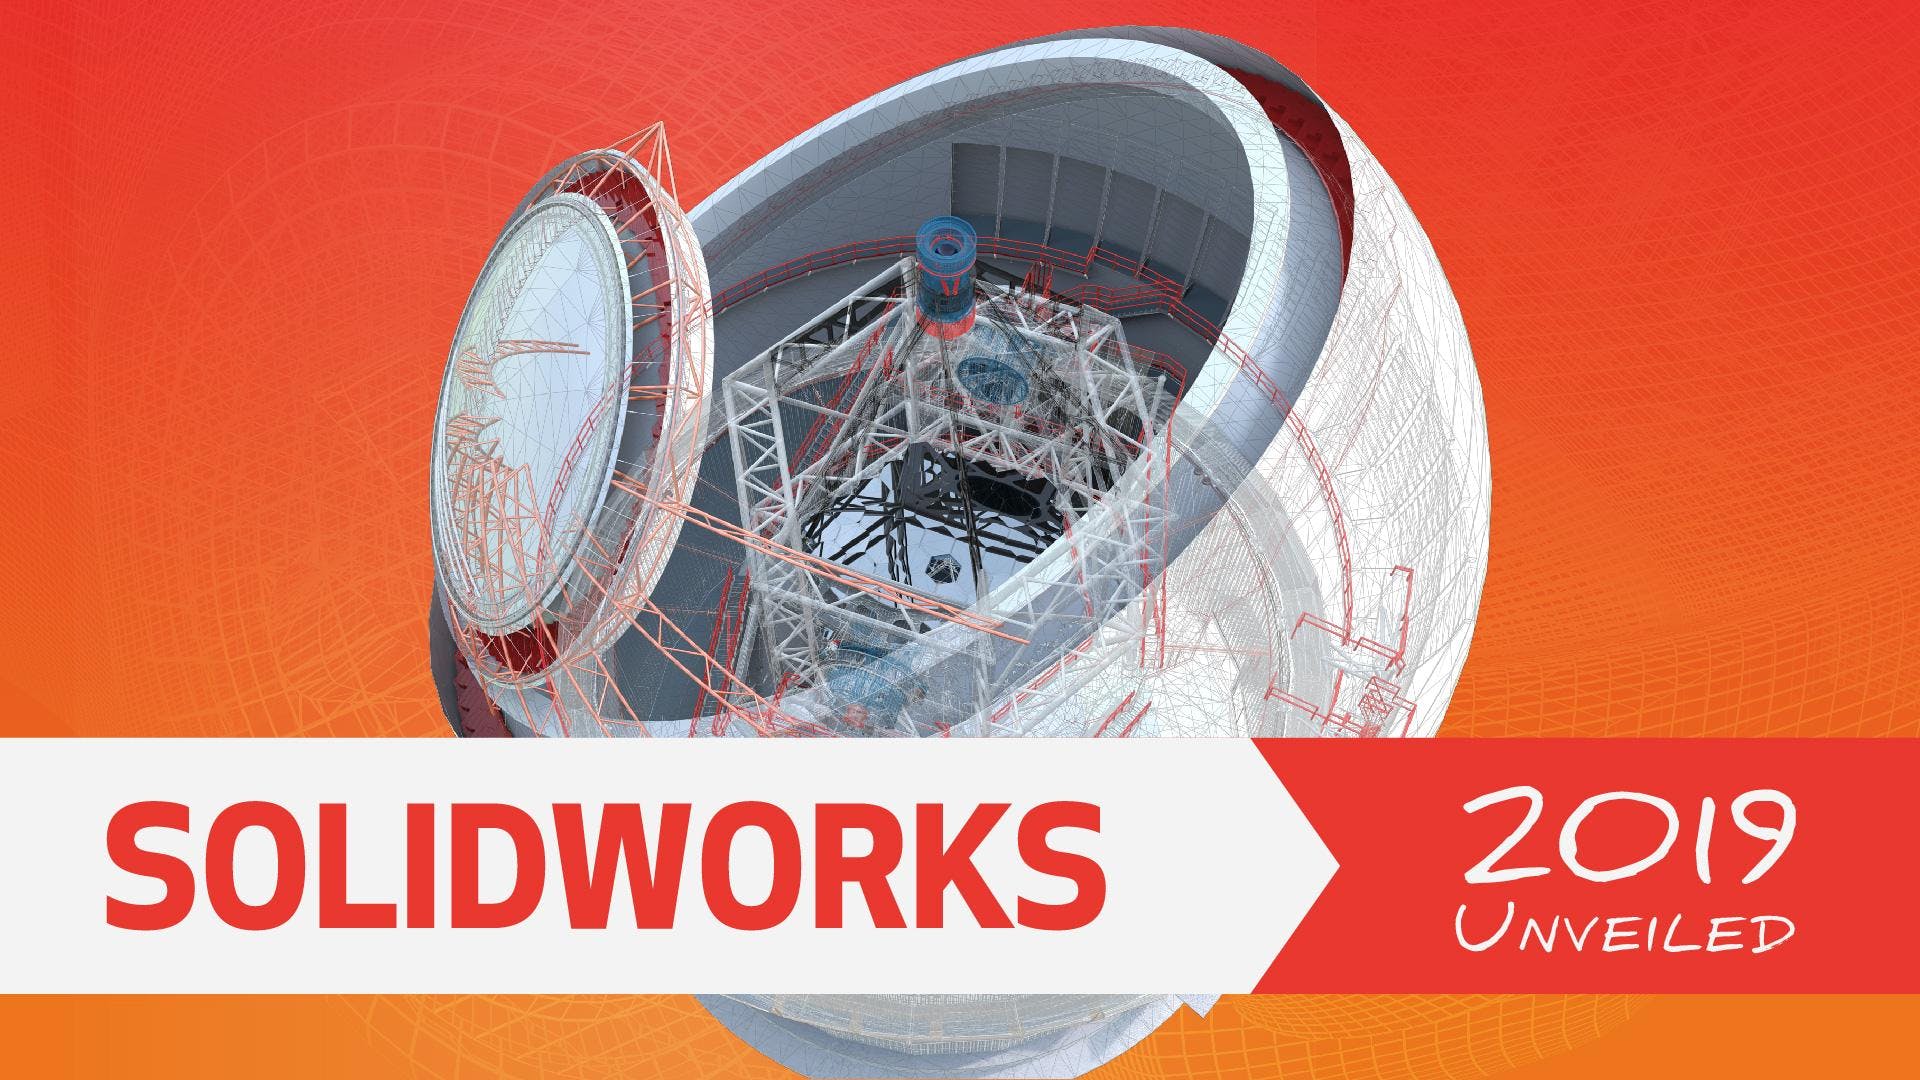 Solidworks 2019 Unveiled